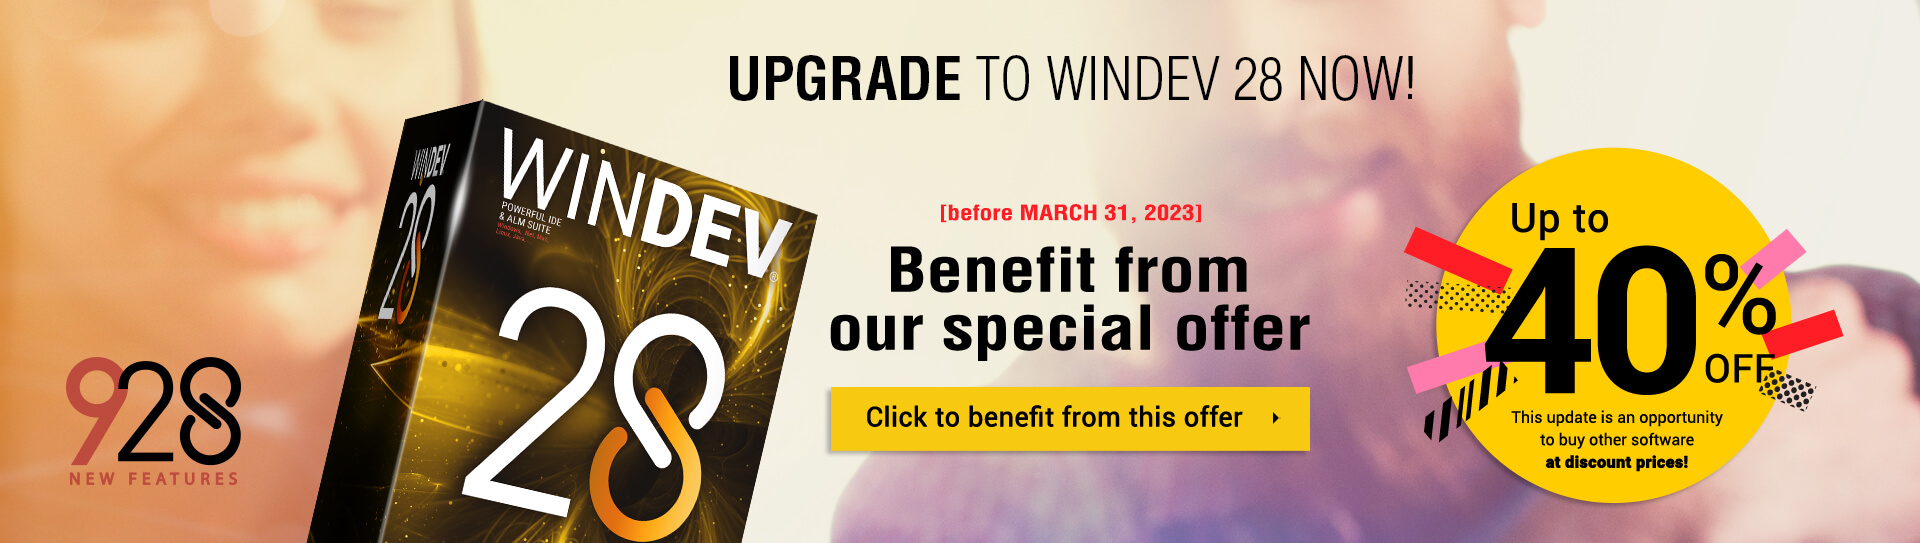 Upgrade to WINDEV 28 now